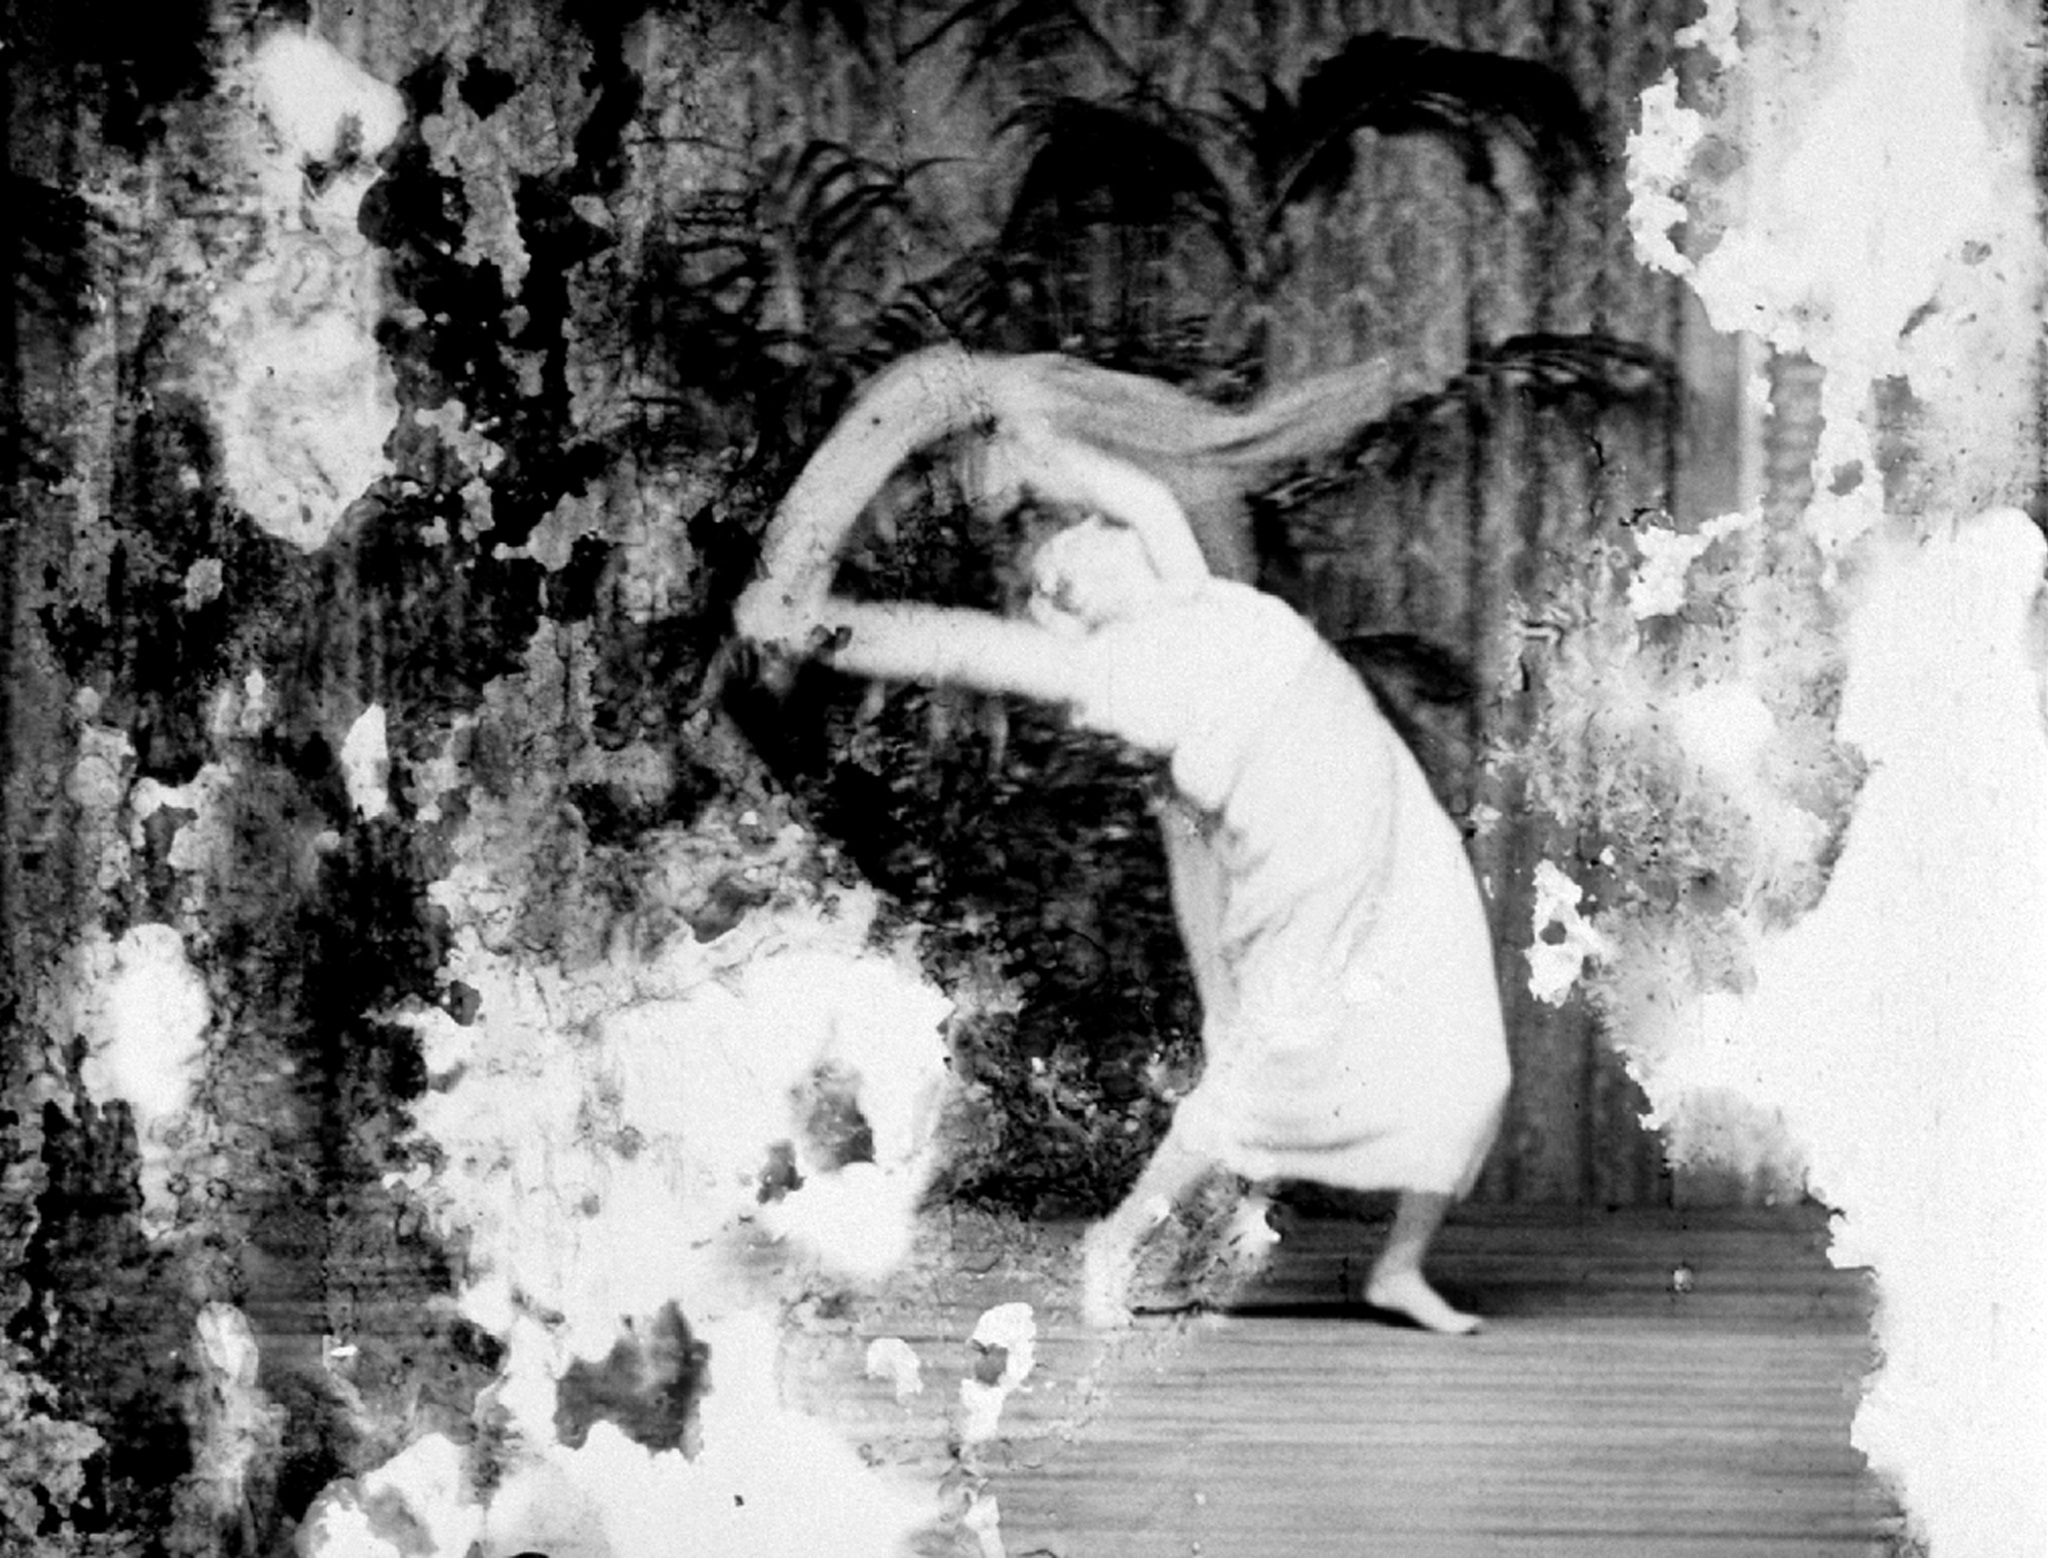 Bill Morrison's film, Dawson City: Frozen Time, is about the discovery of several films and photos that were found in 1978, frozen in a pool in the Yukon. Florence Fleming Noyes Dances In Support Of The Suffragist Movement, 1914.